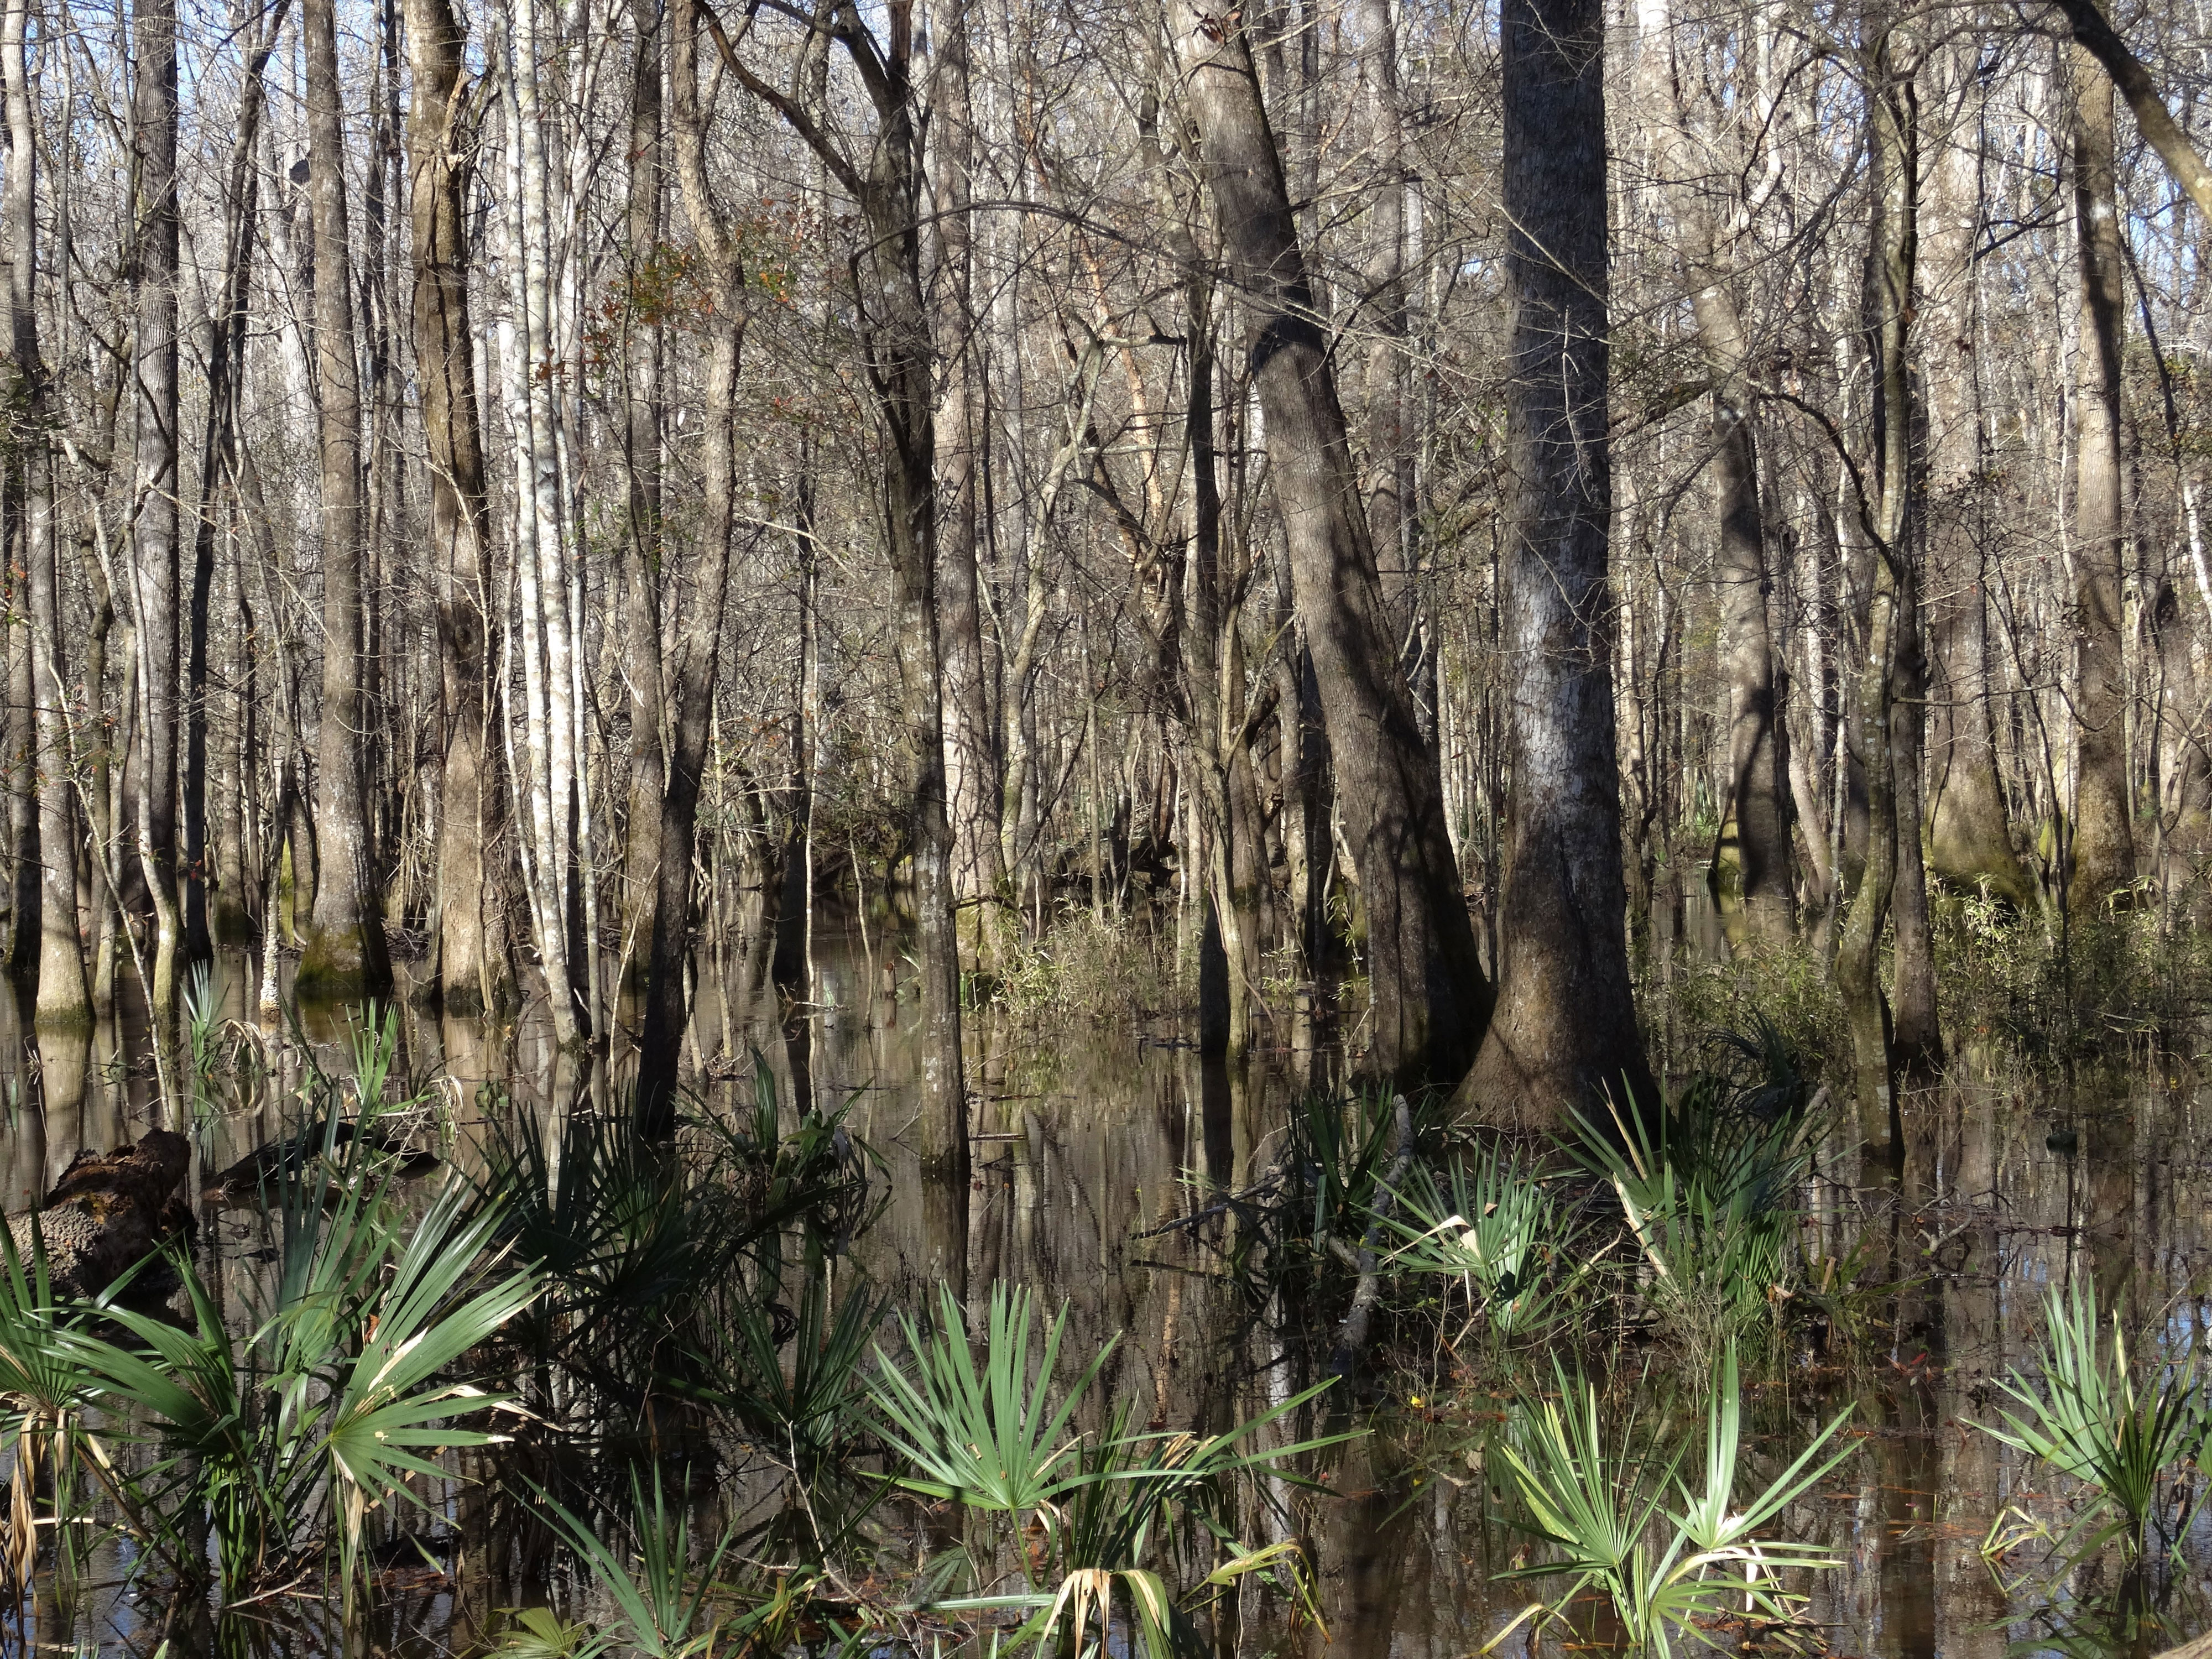 Winter, bare Tupelos stand. Mirror-like reflection of the trees against still water. Dwarf palmettos, green, cover the base of the image almost as if you were going to step on them. 